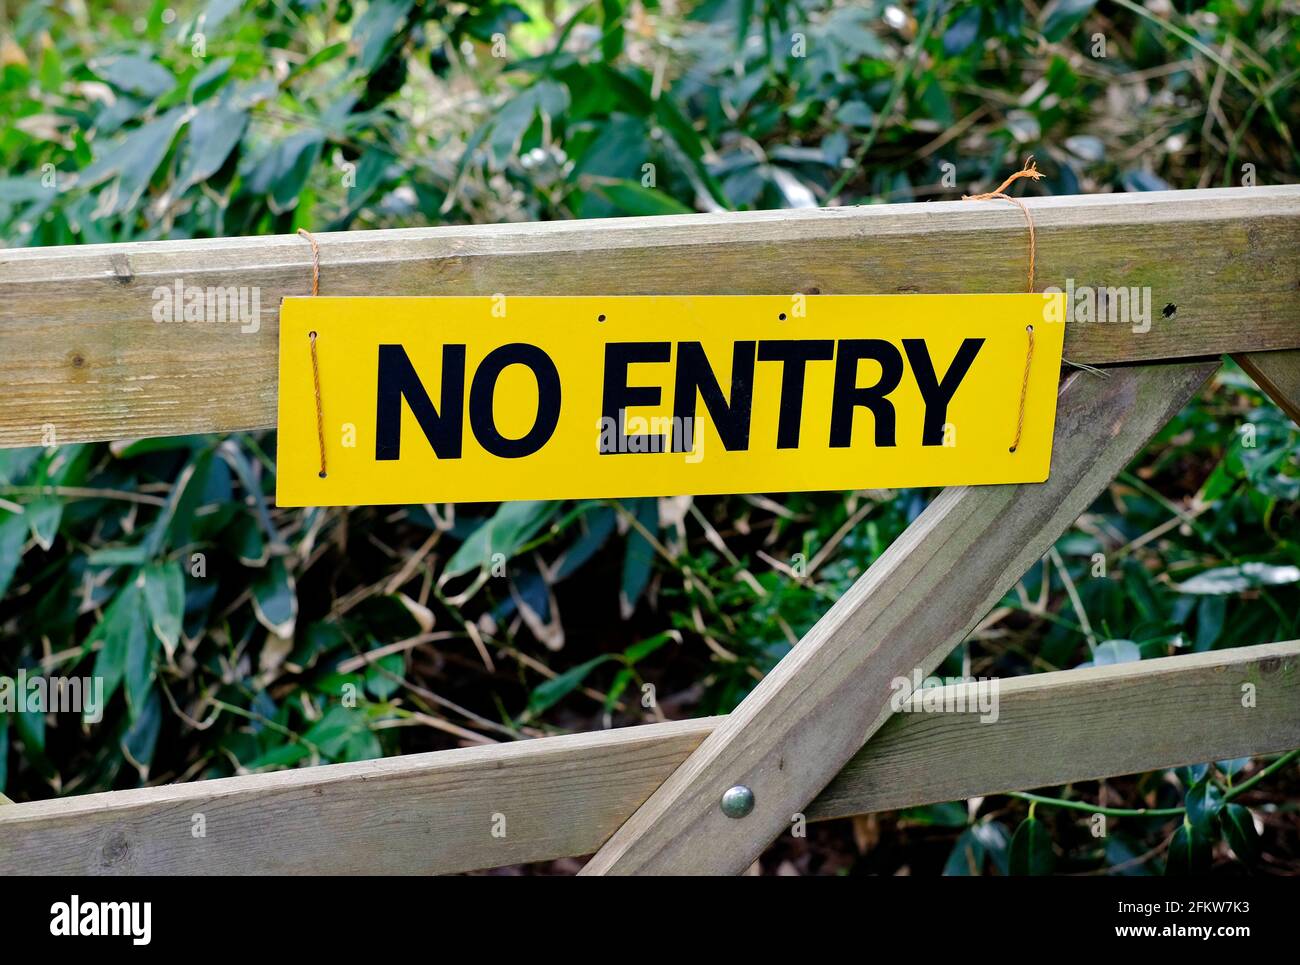 yellow no entry sign on wooden 5 bar gate, norfolk, england Stock Photo